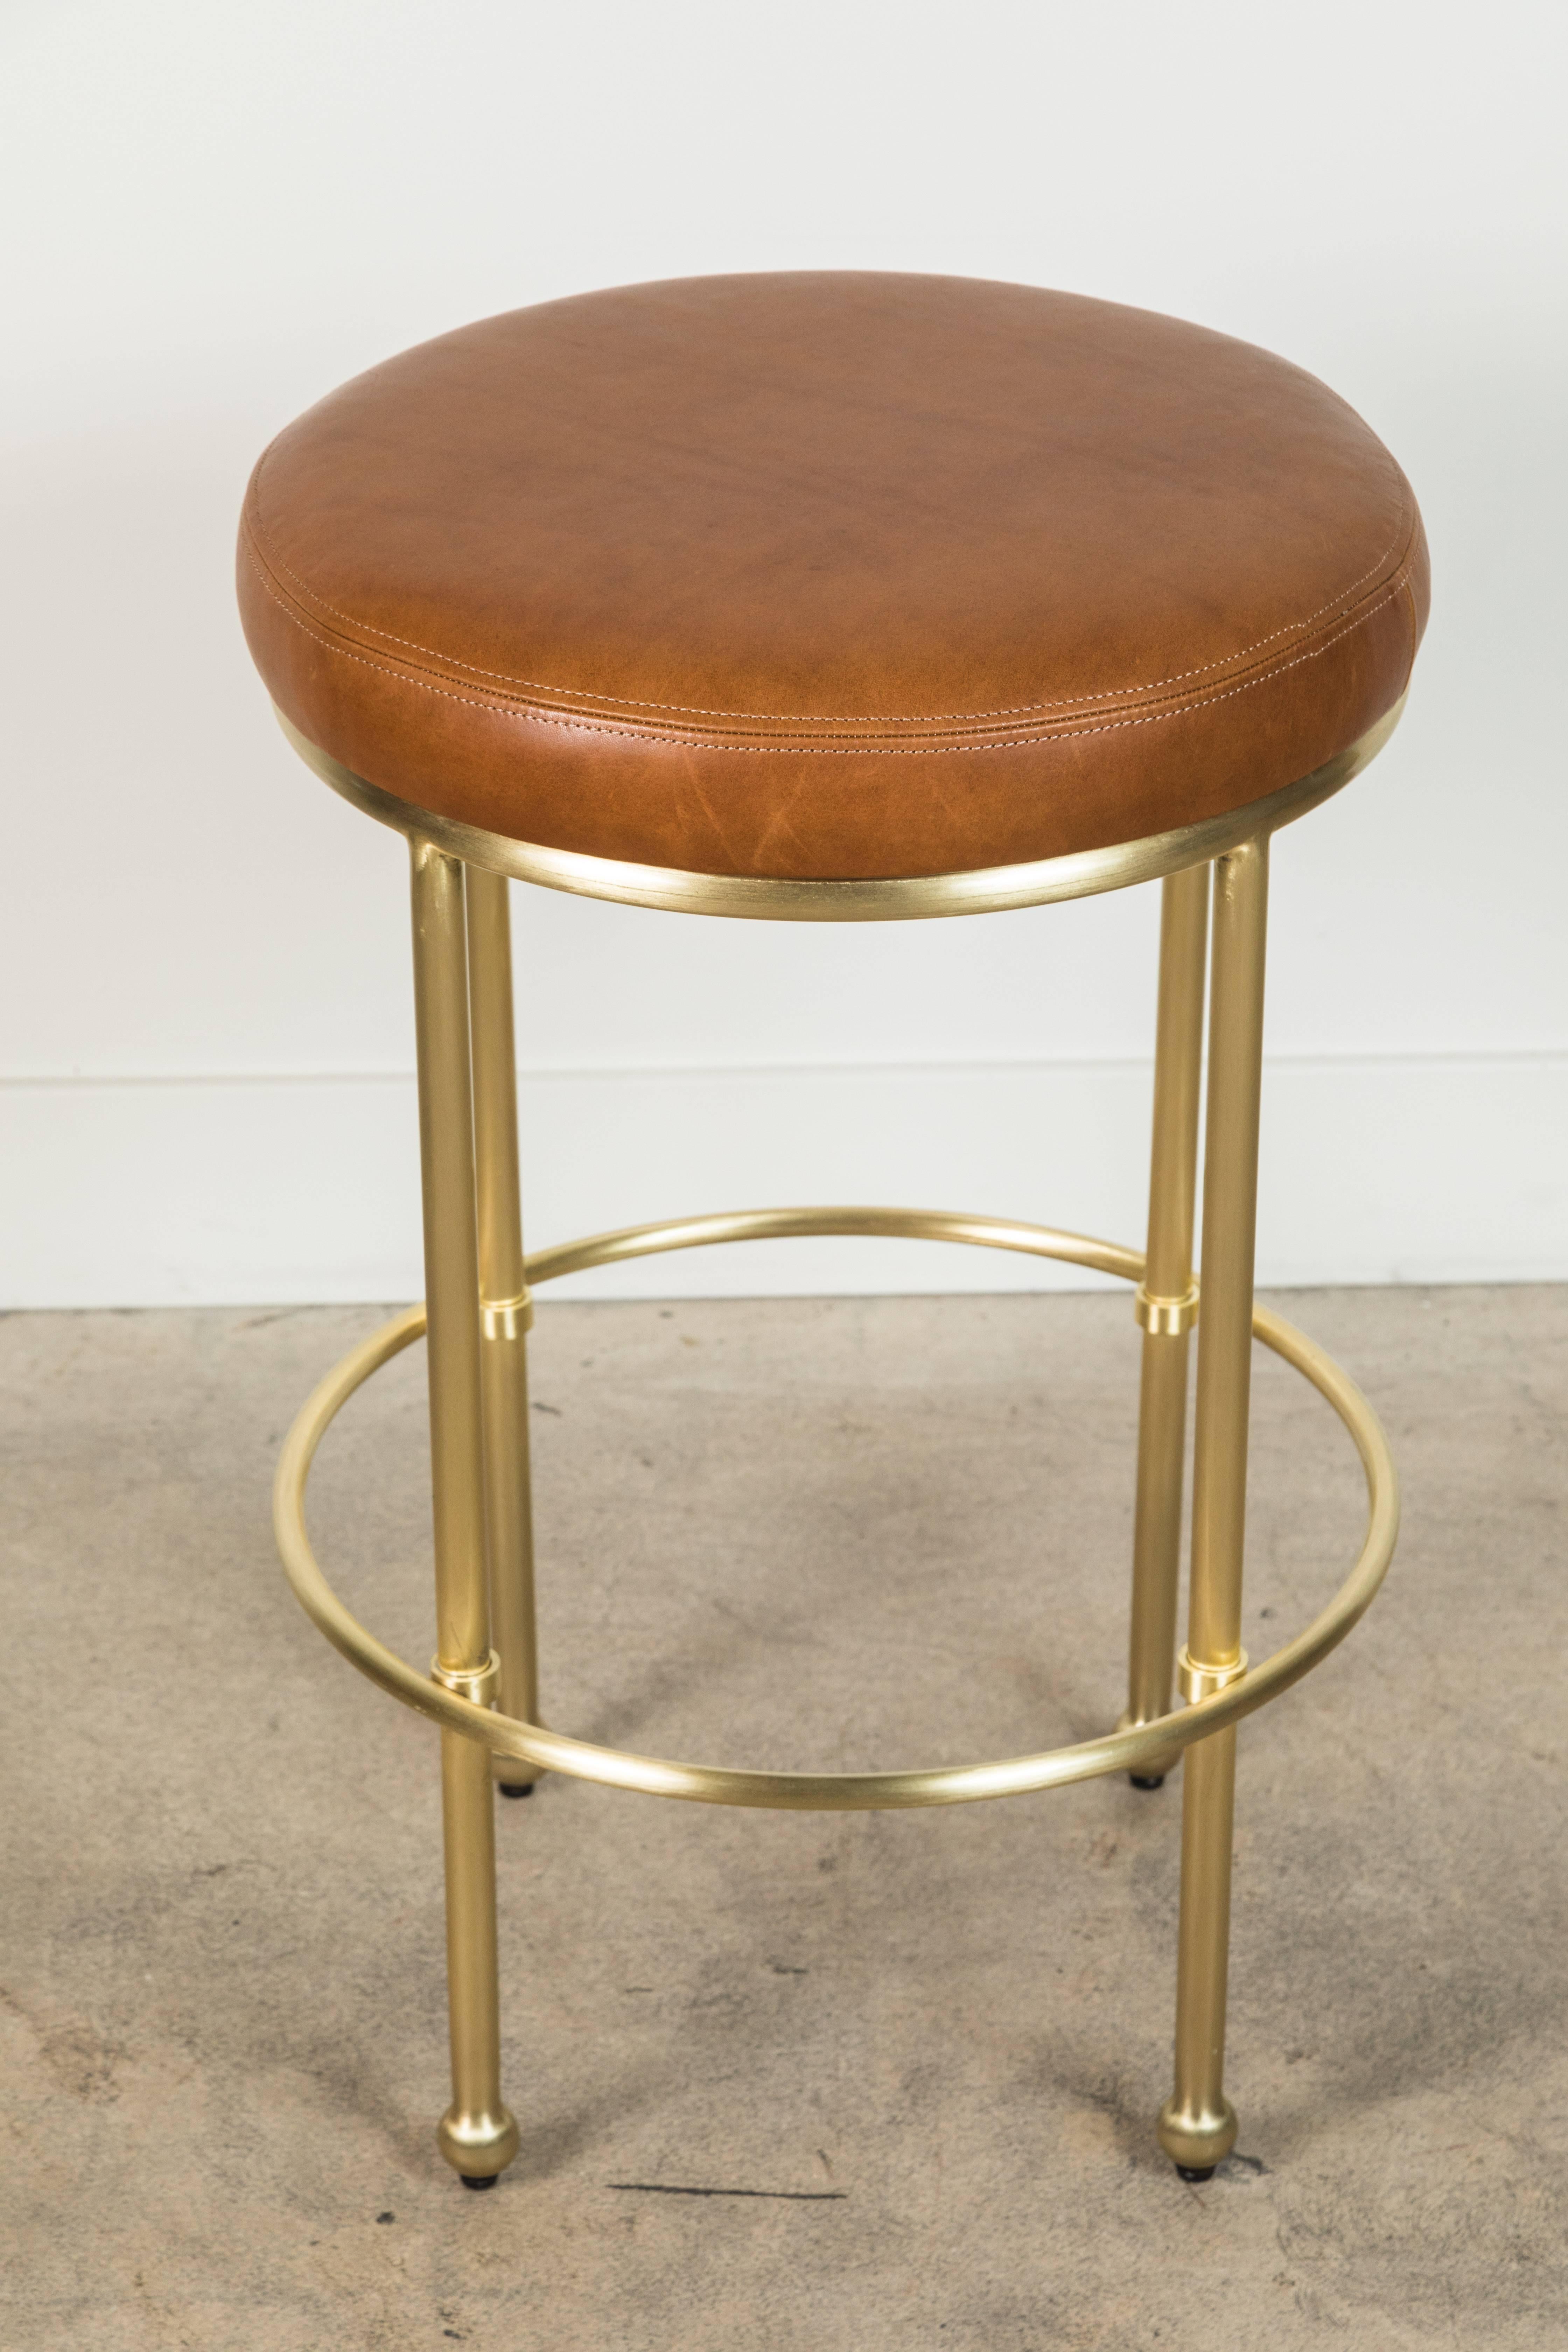 Mid-Century Modern Orsini Counterstool in Leather and Brass by Lawson-Fenning